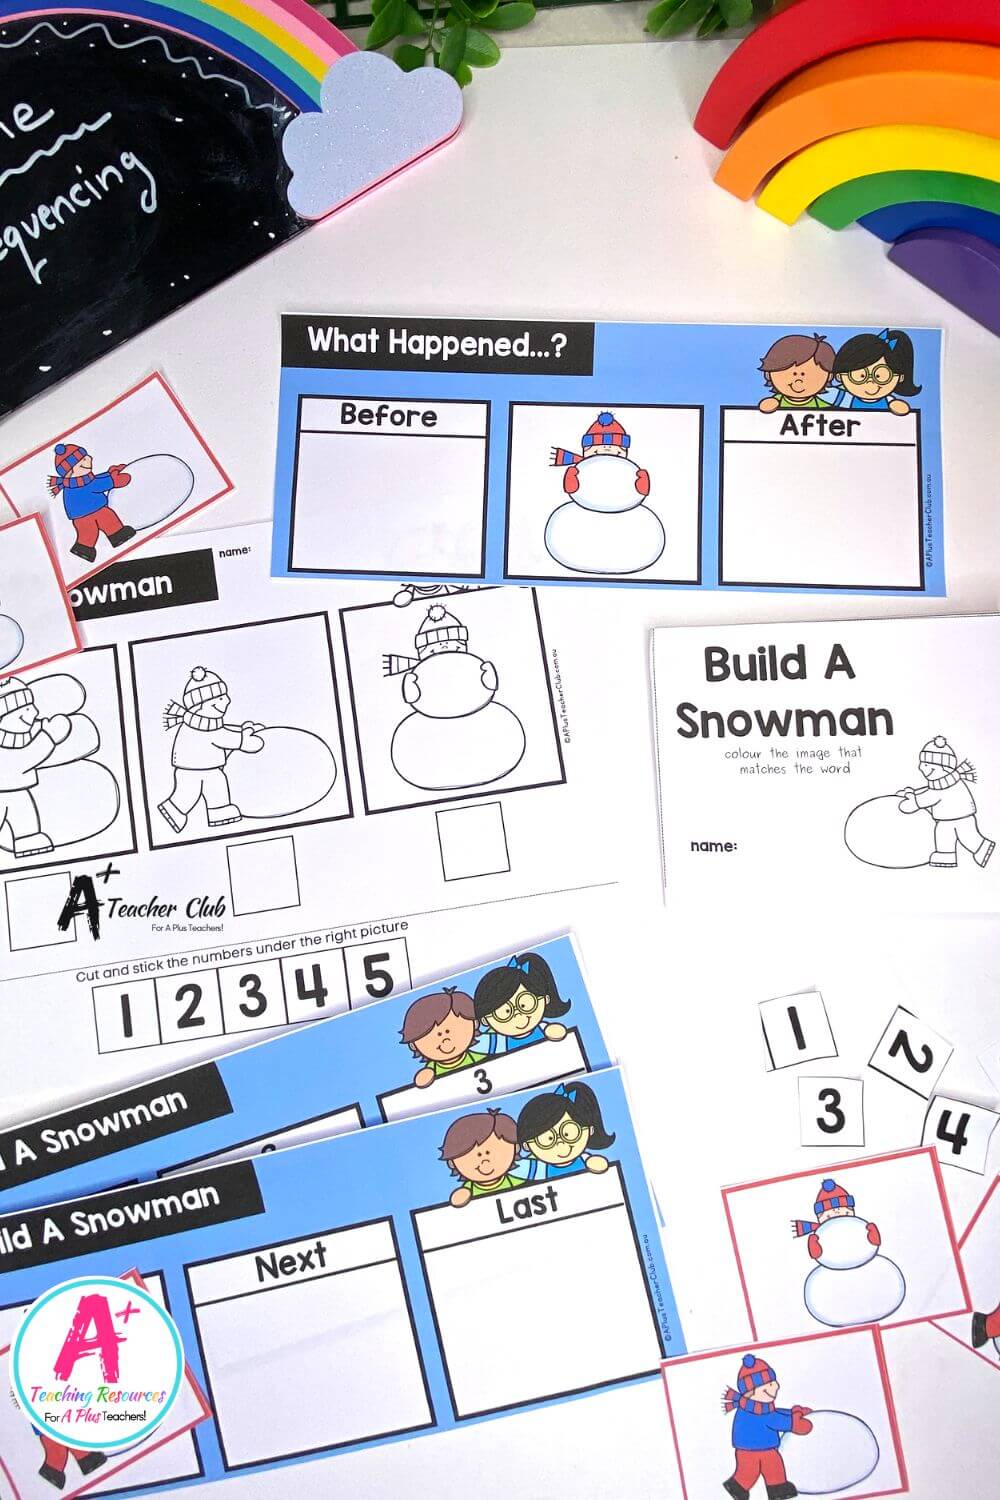 3-Step Sequencing Everyday Events - Build A Snowman Activities Pack